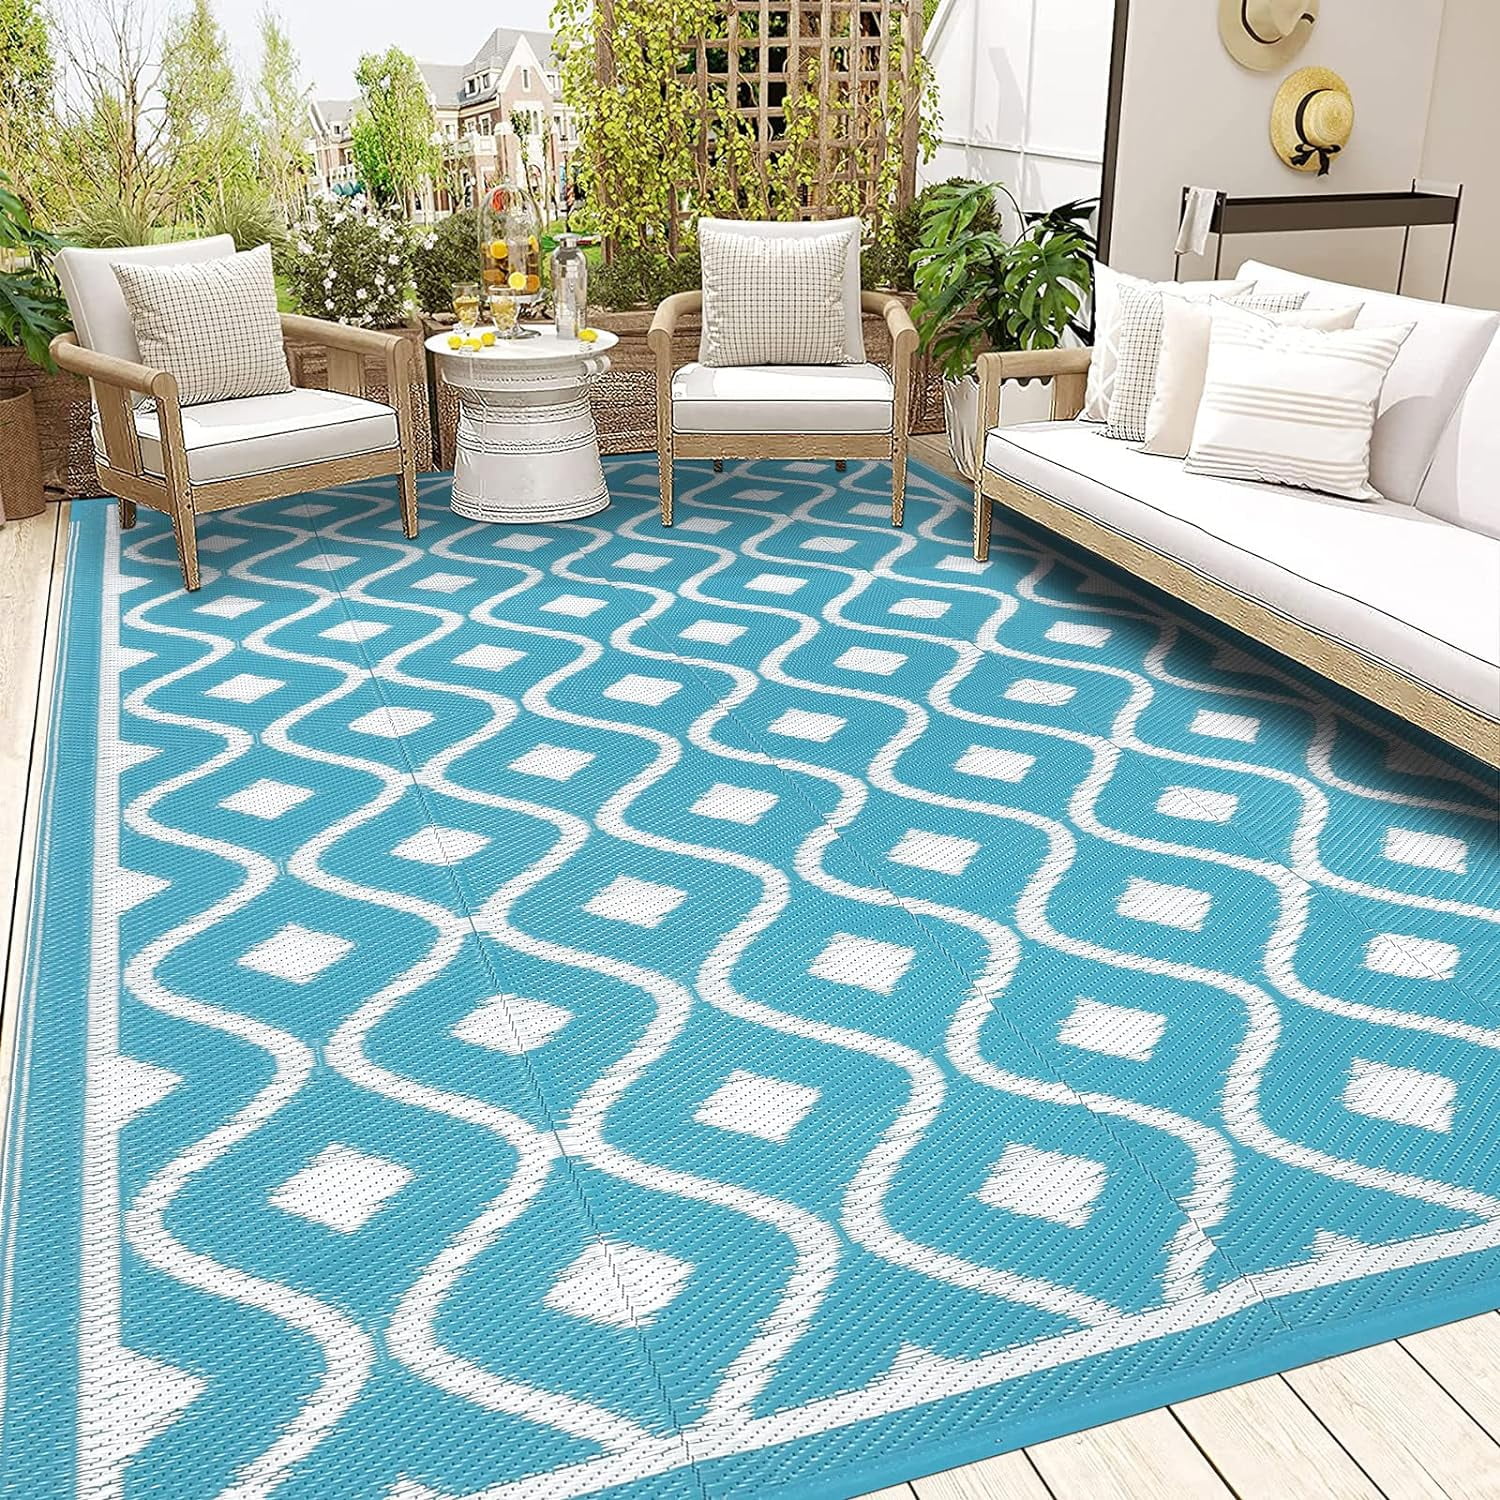 Large Outdoor Carpet for Patio Reuse Motorhome Patio Rugs Foldable Portable  Summer Waterproof PP Tube Woven Beach Floor Mat Blue - AliExpress